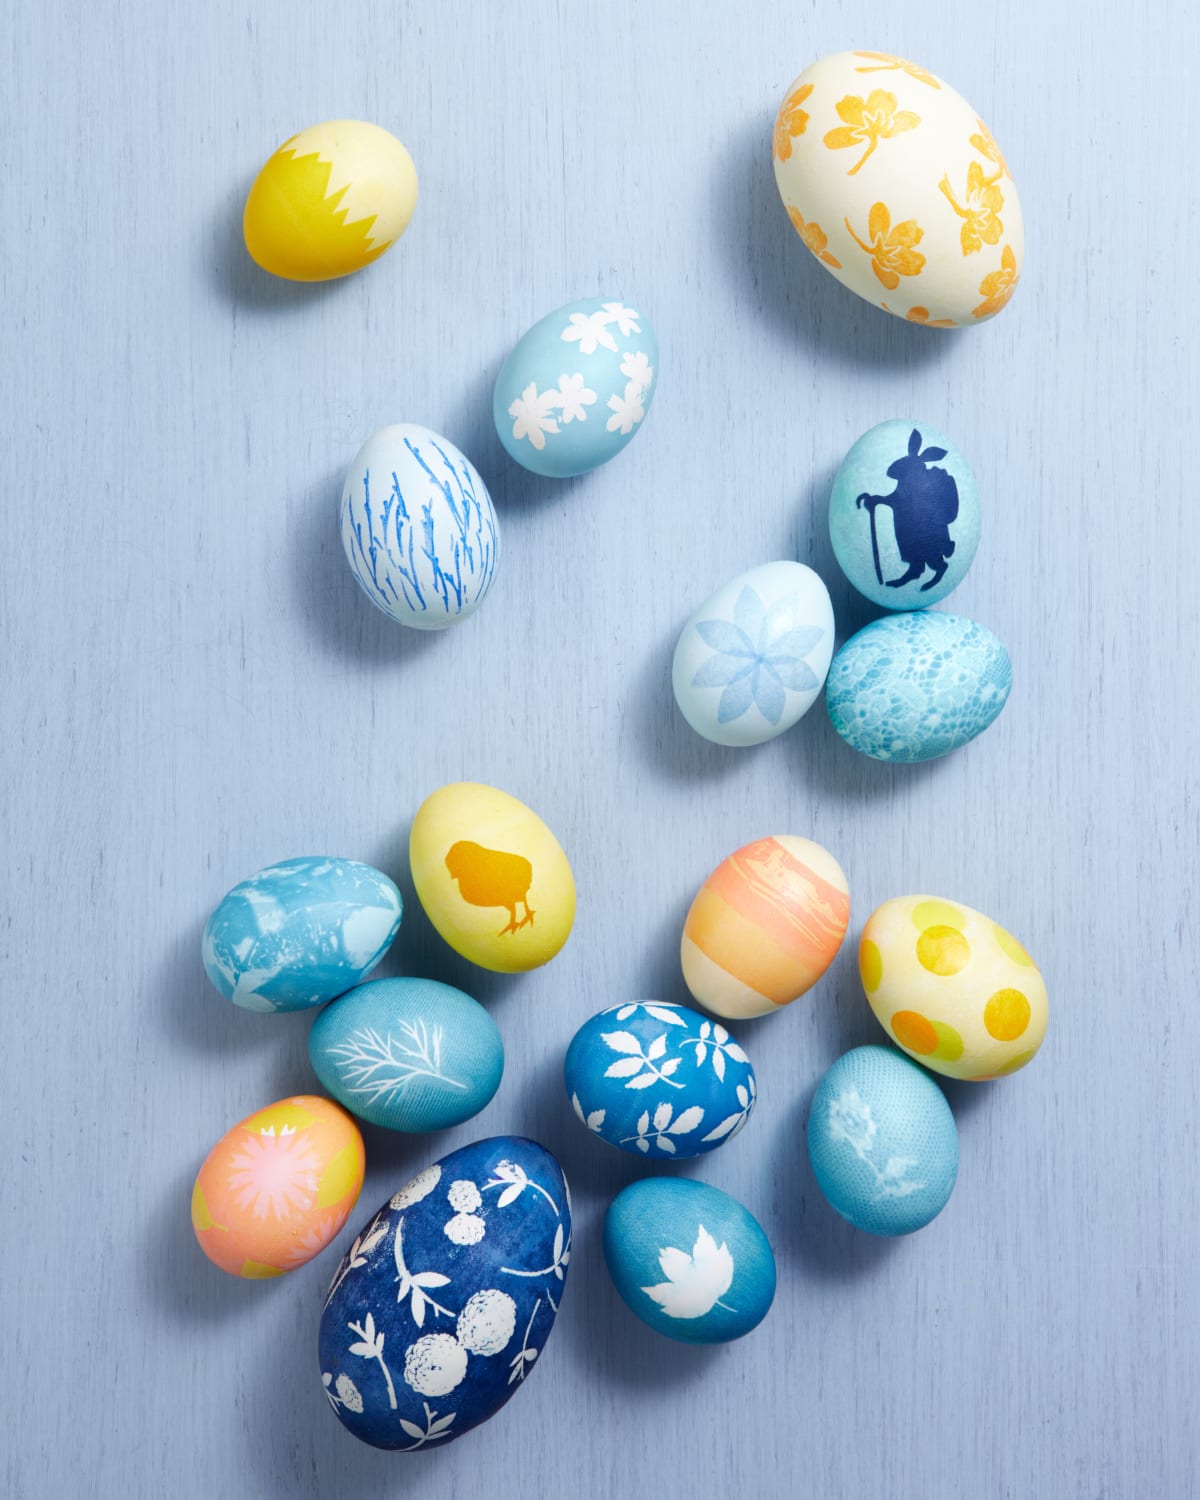 50 of Our All-Time Best Ideas for Decorating Easter Eggs